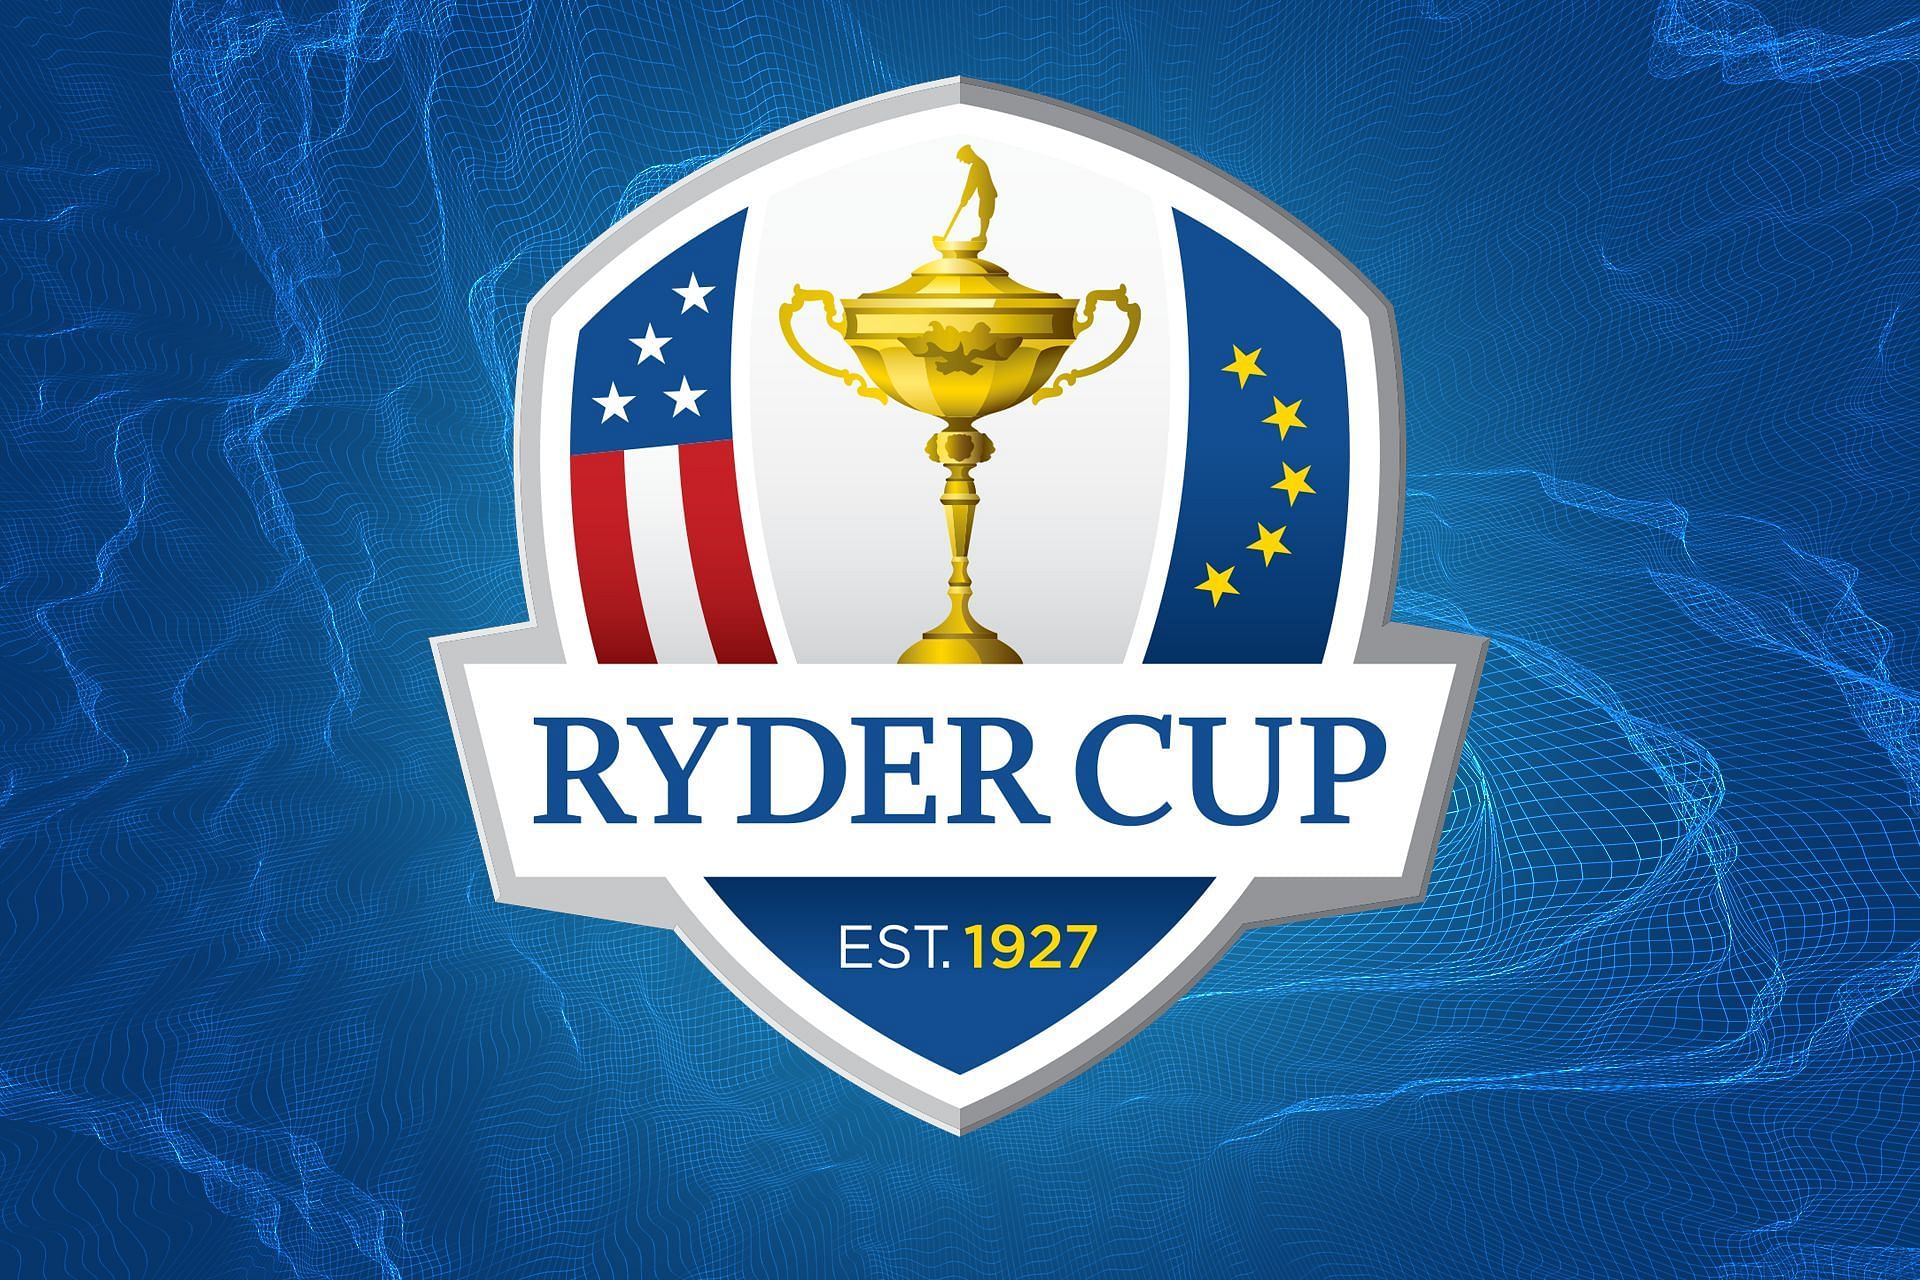 Is the Ryder Cup a PGA event?